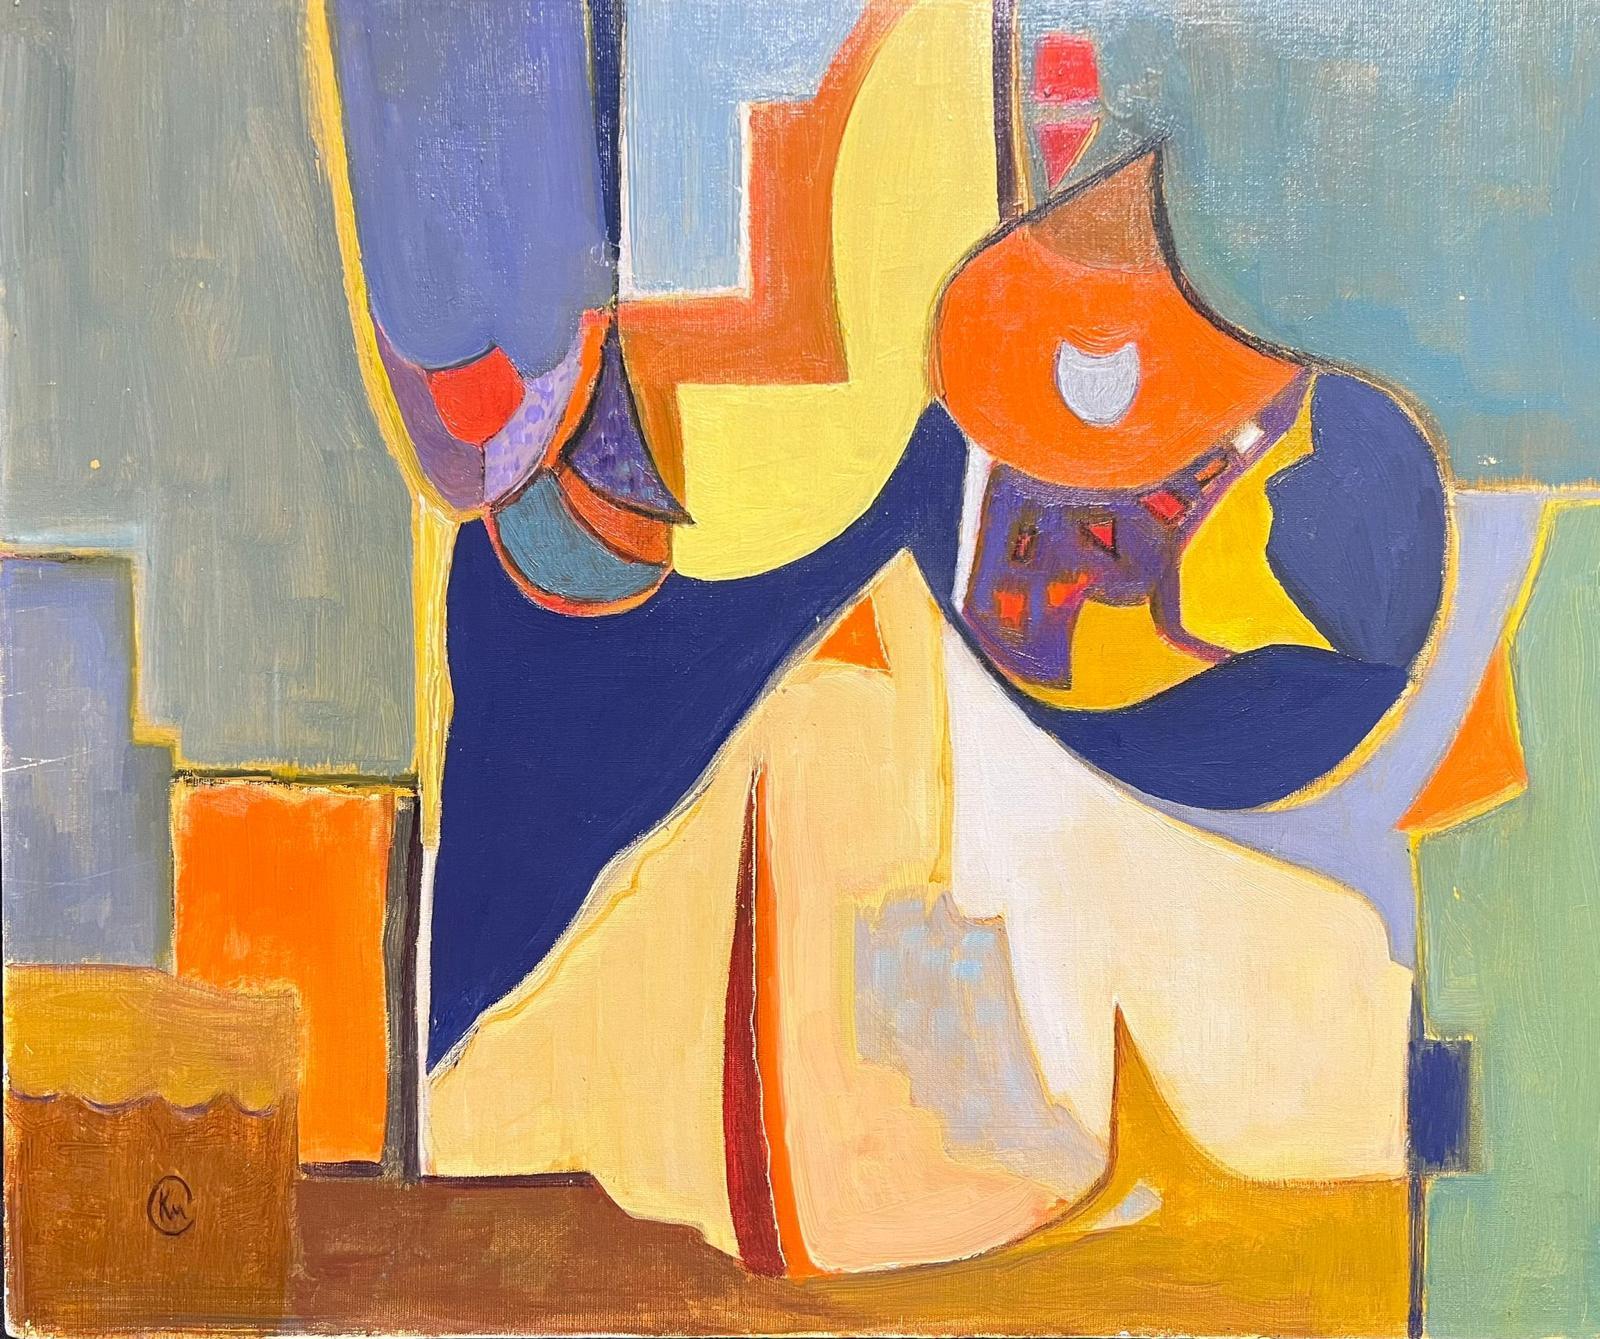 Abstract Painting Kathleen Crow - The Moderns British Cubist Oil Painting Still Life Composition Large Original Signed